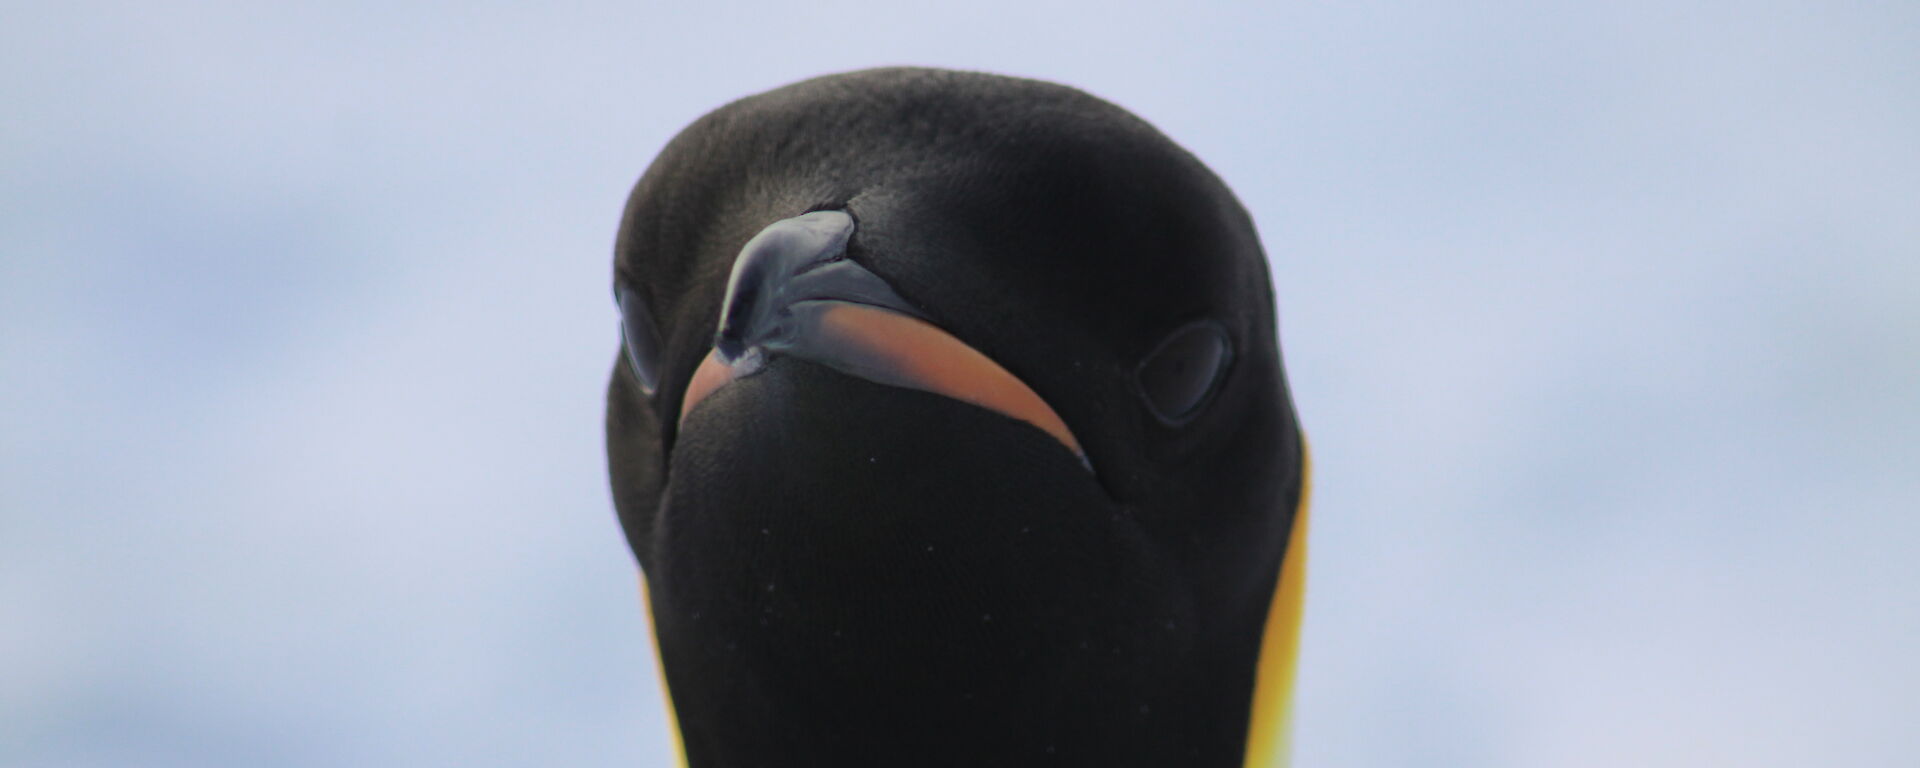 The black and white head of a penguin.